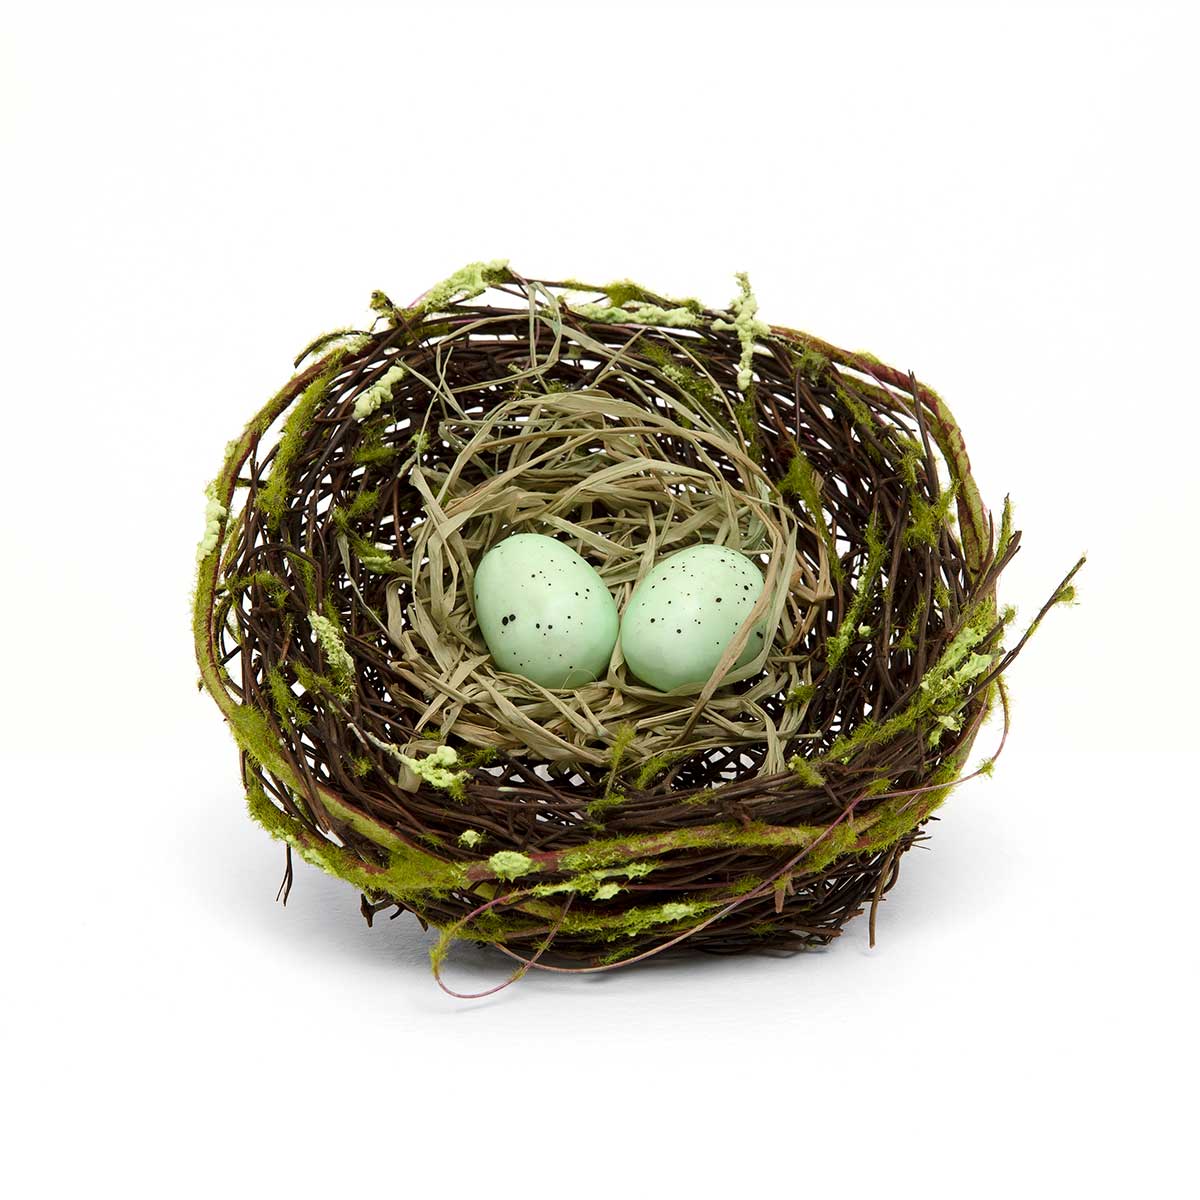 TWIG NEST WITH RAFFIA, MOSS AND BLUE EGGS 6"X2.5"